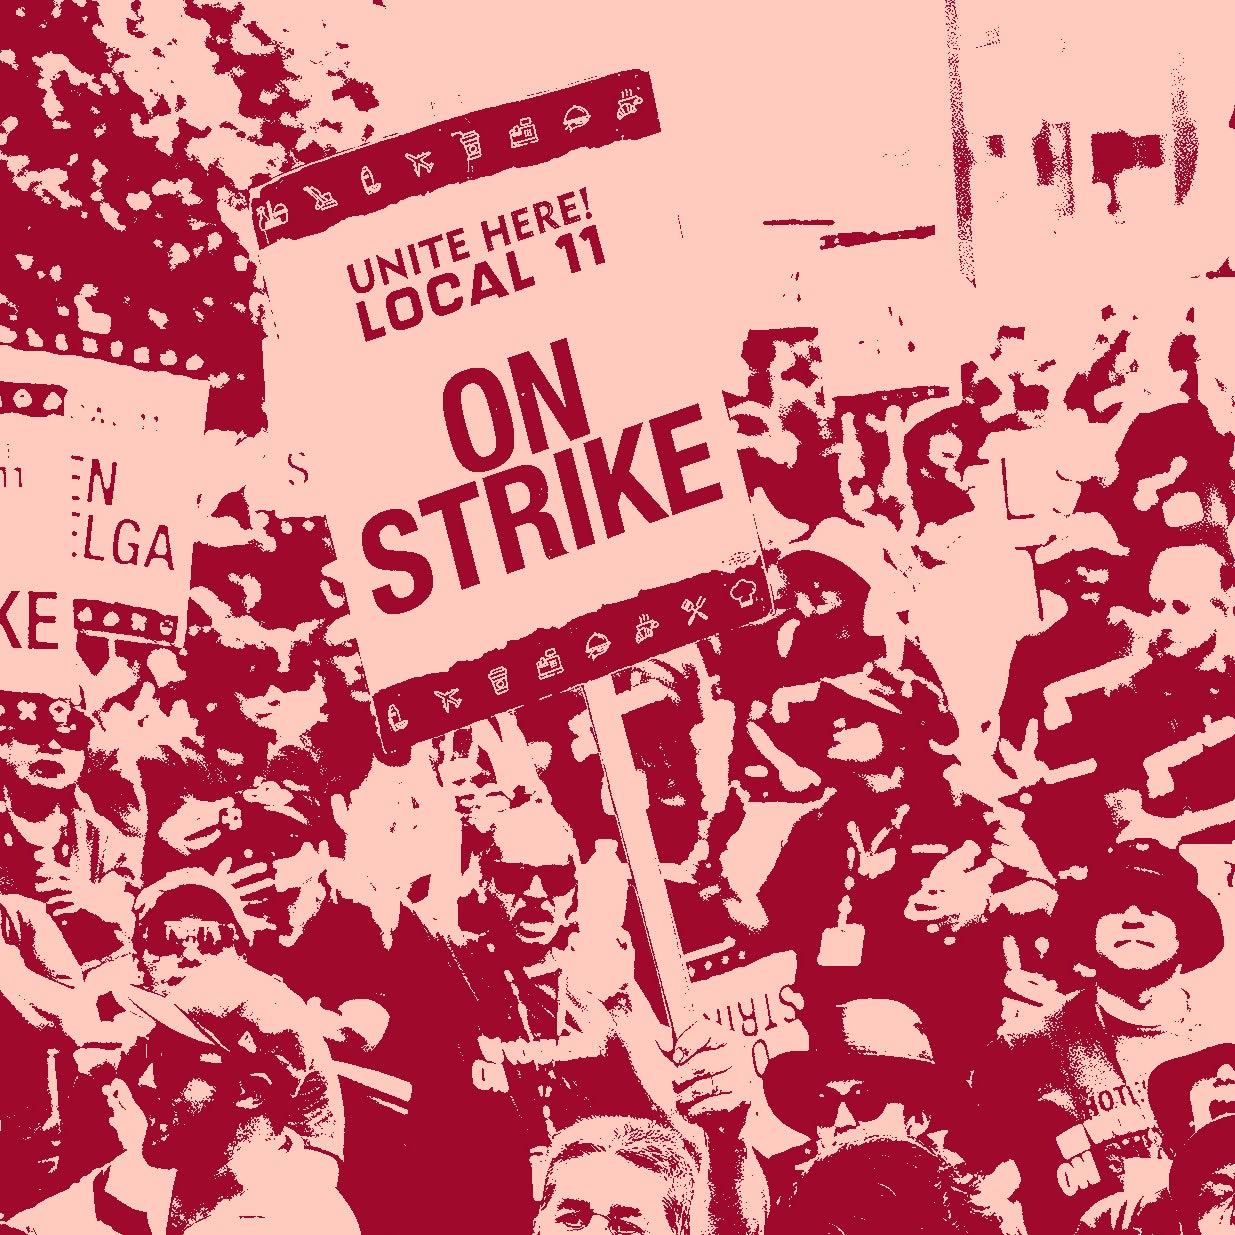 In a Year of Record Hospitality Strikes, Women Workers Have Taken the Lead